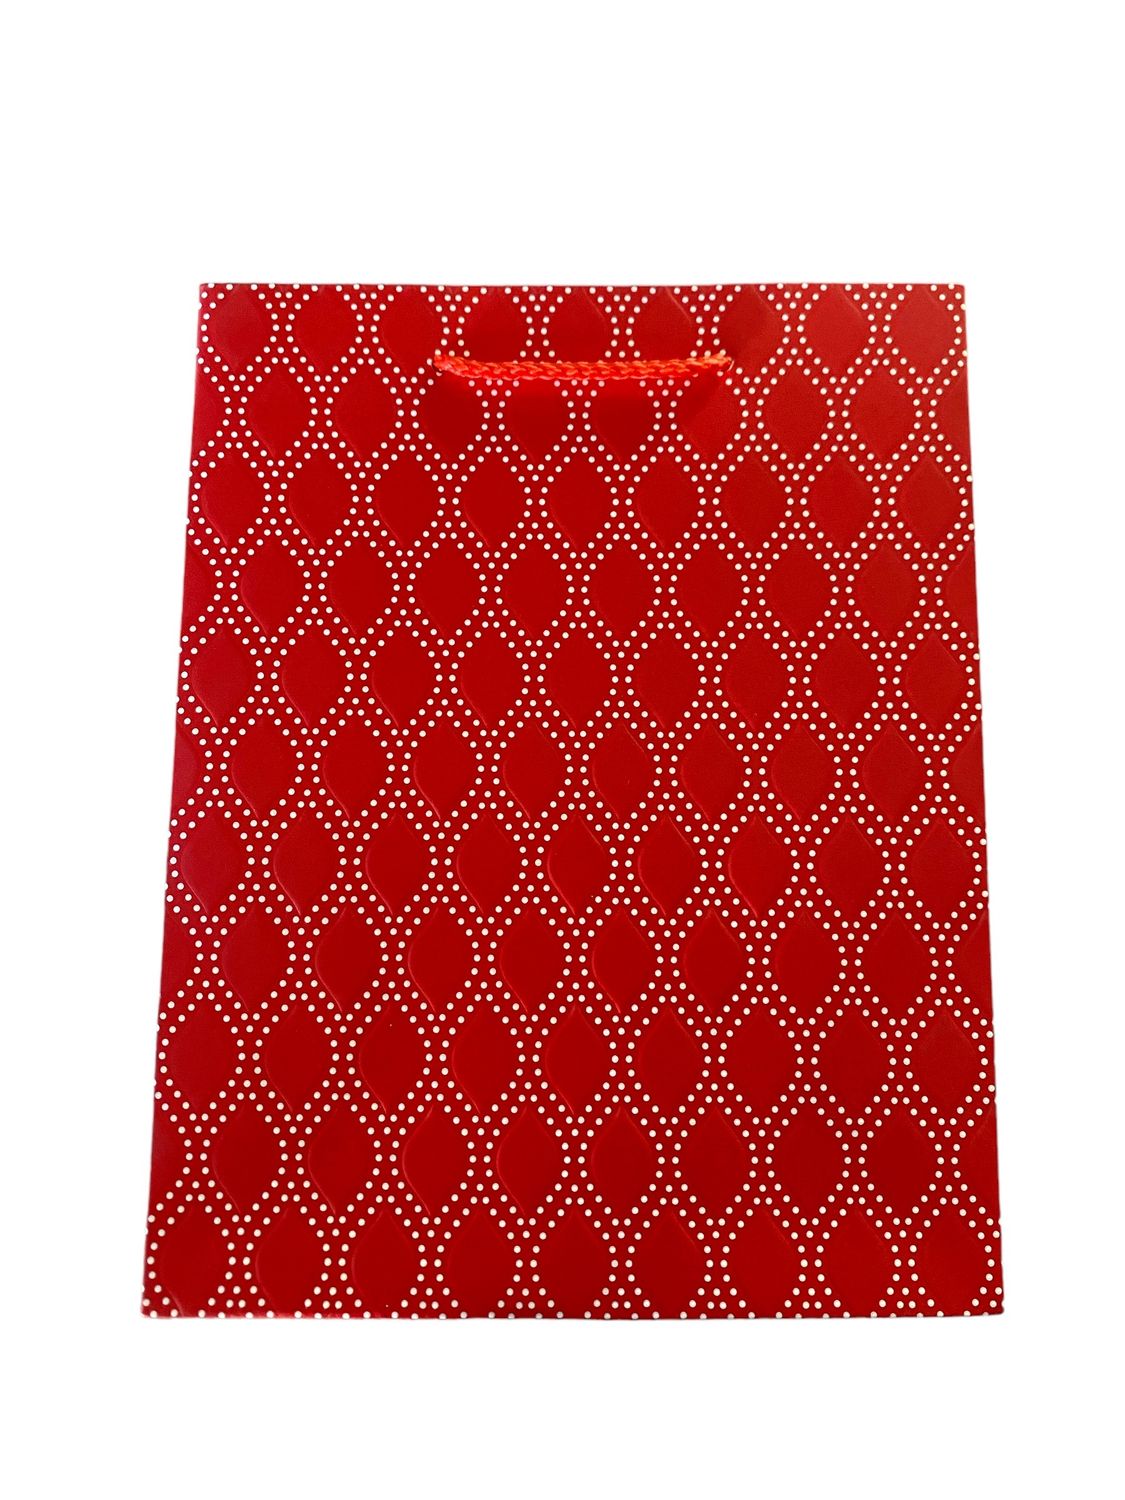 Oval Shape &amp; Dots Red Gift Bag Small PK3 (R10.50 Each)